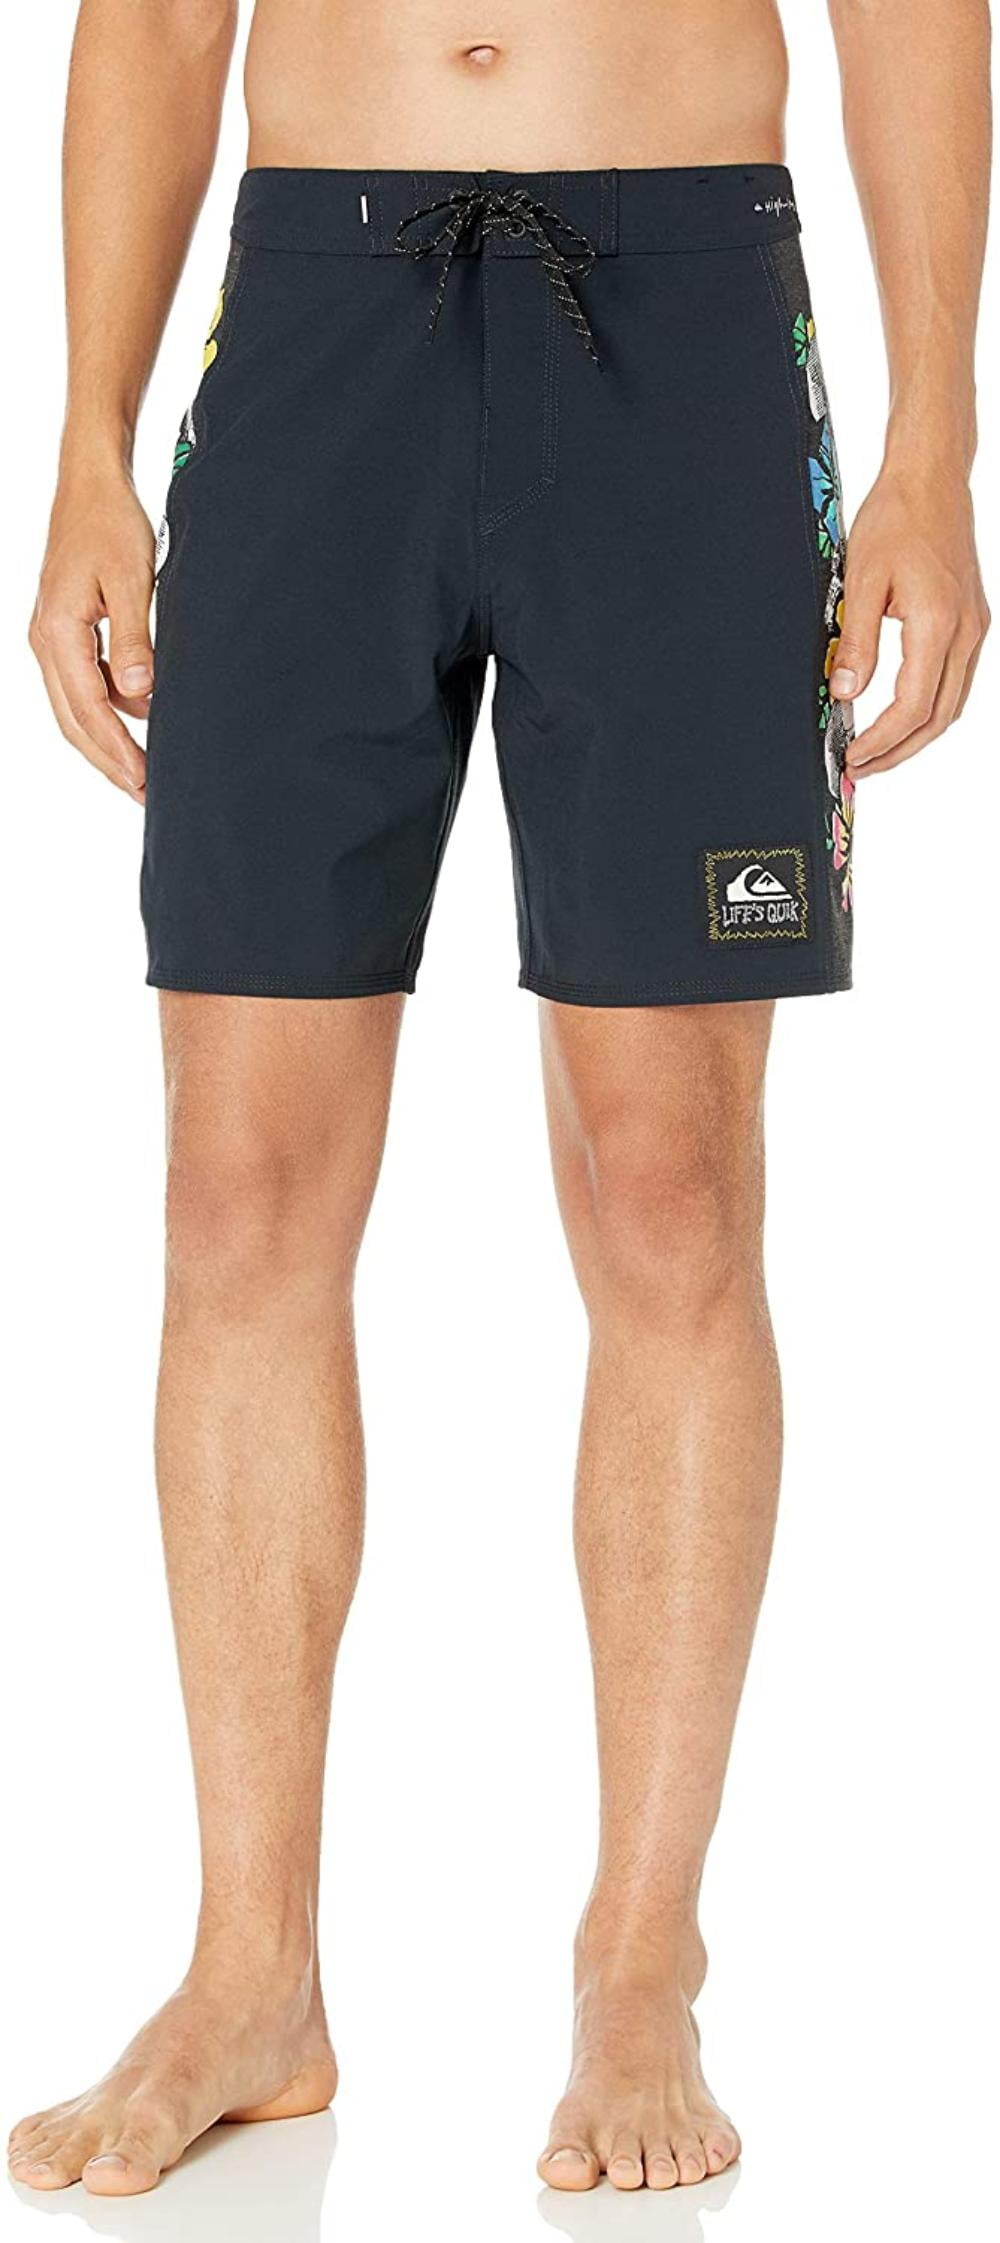 Young Men Seamless-Pattern-with-Skulls-and-Original Board Shorts Quick-Dry Outdoor Beach Shorts